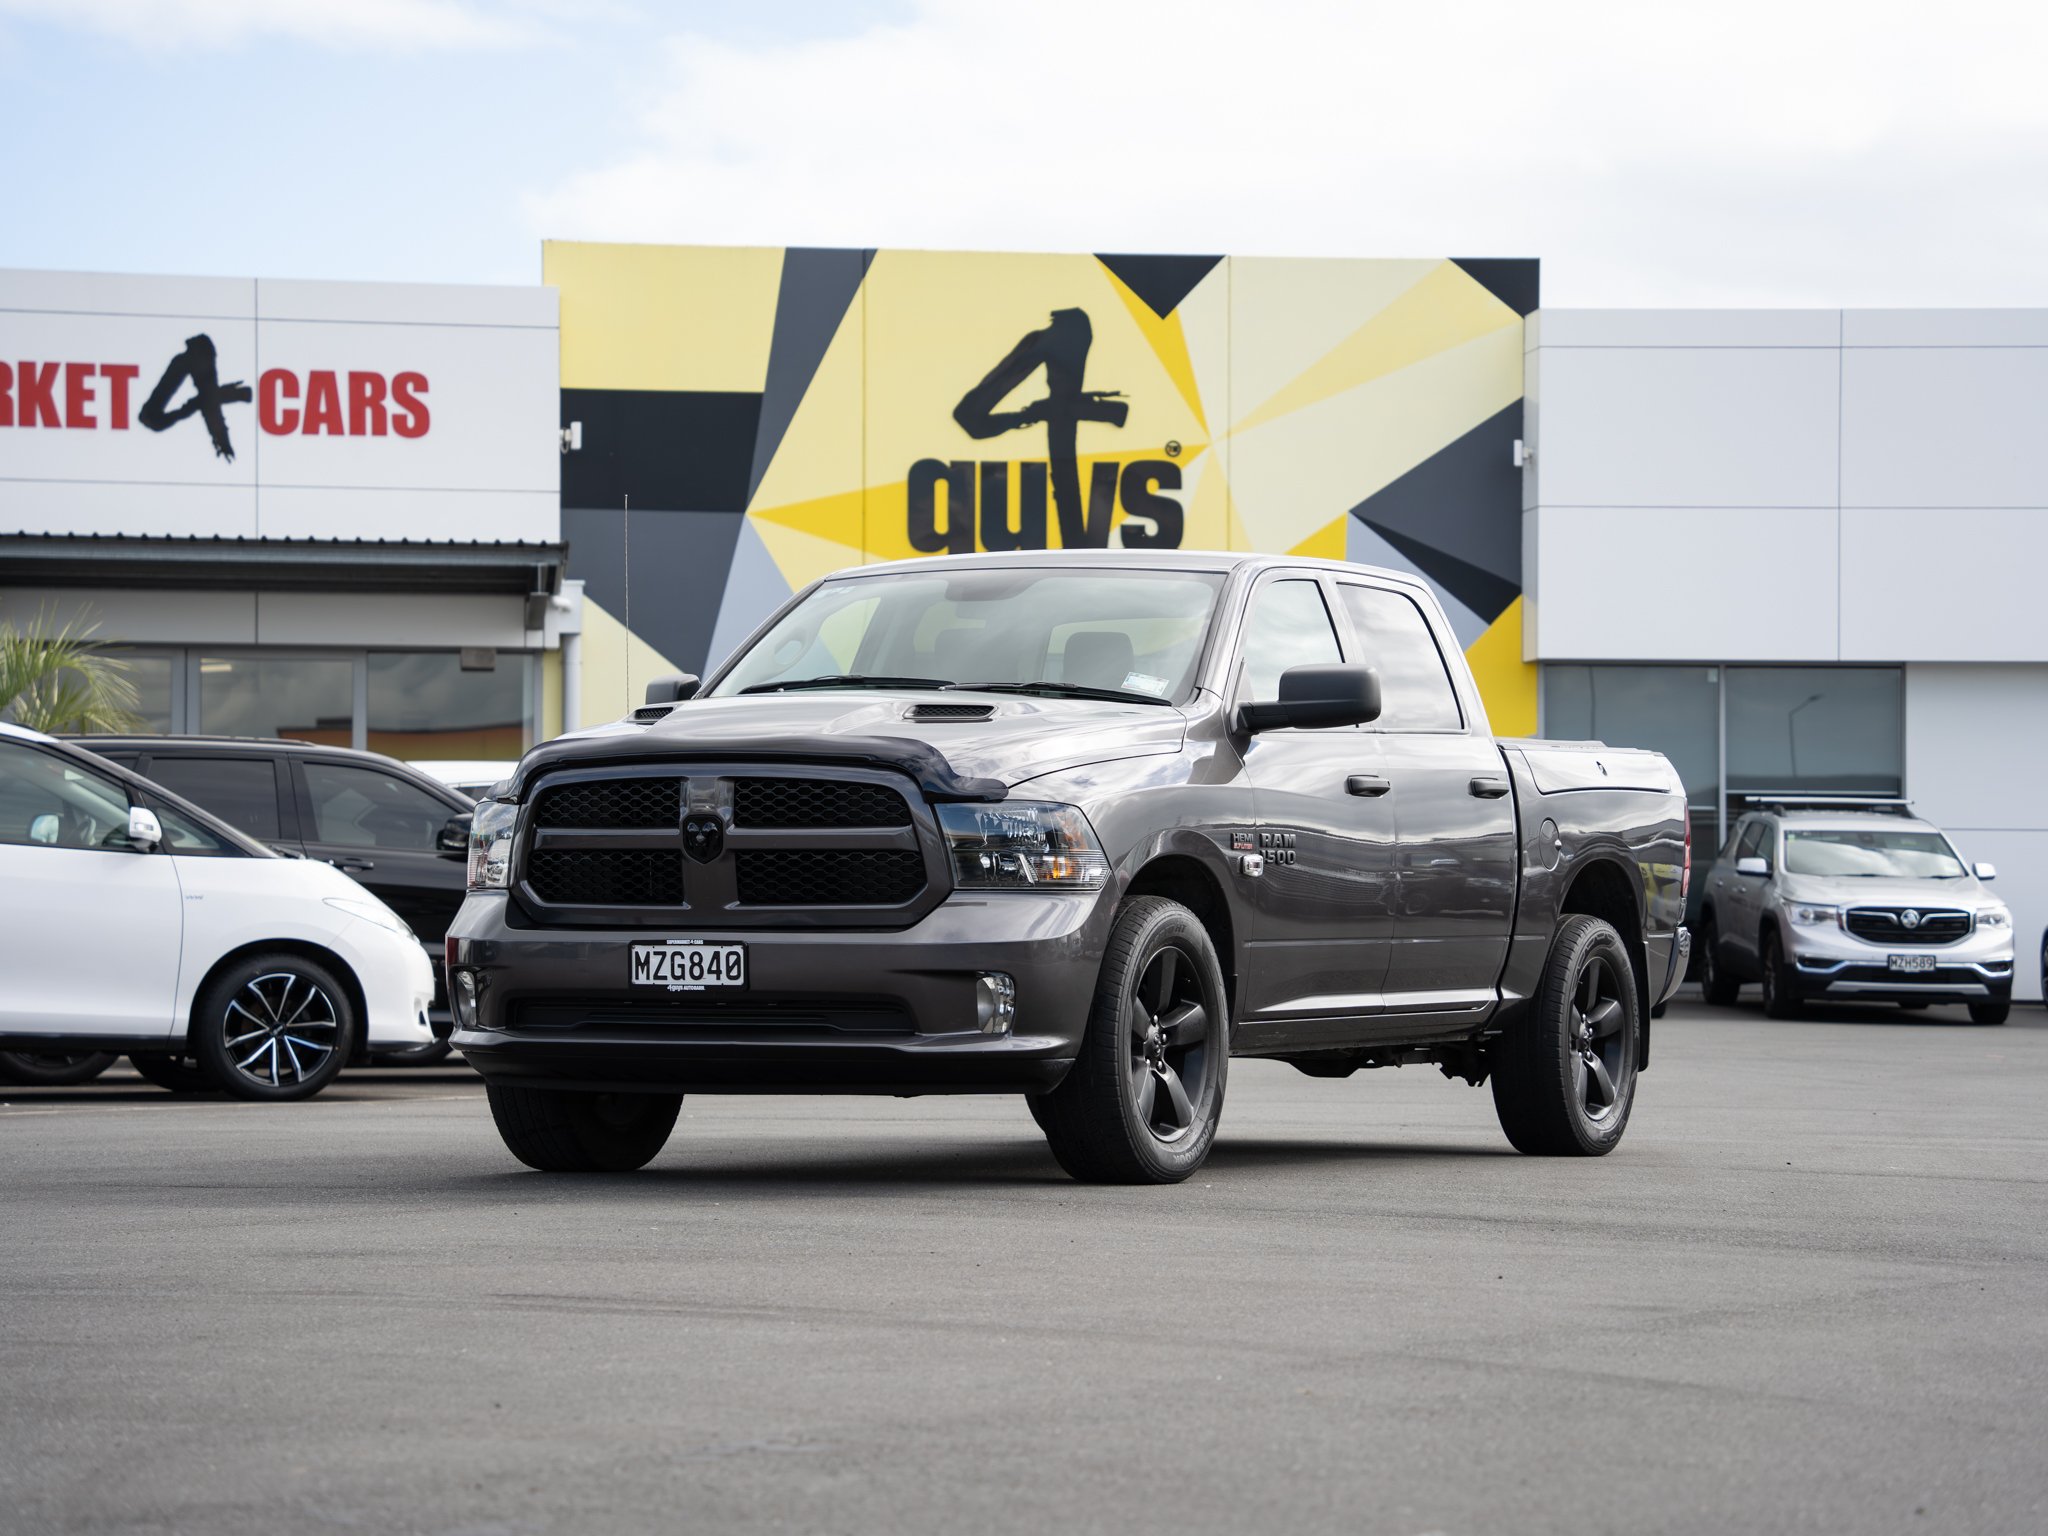 Just Arrived! 2020 RAM 1500 EXPRESS BOX 5.7L V8 4WD - $79,990NZD. Perfect for work or weekend adventures.

#4Guys #NewZealand #Ram